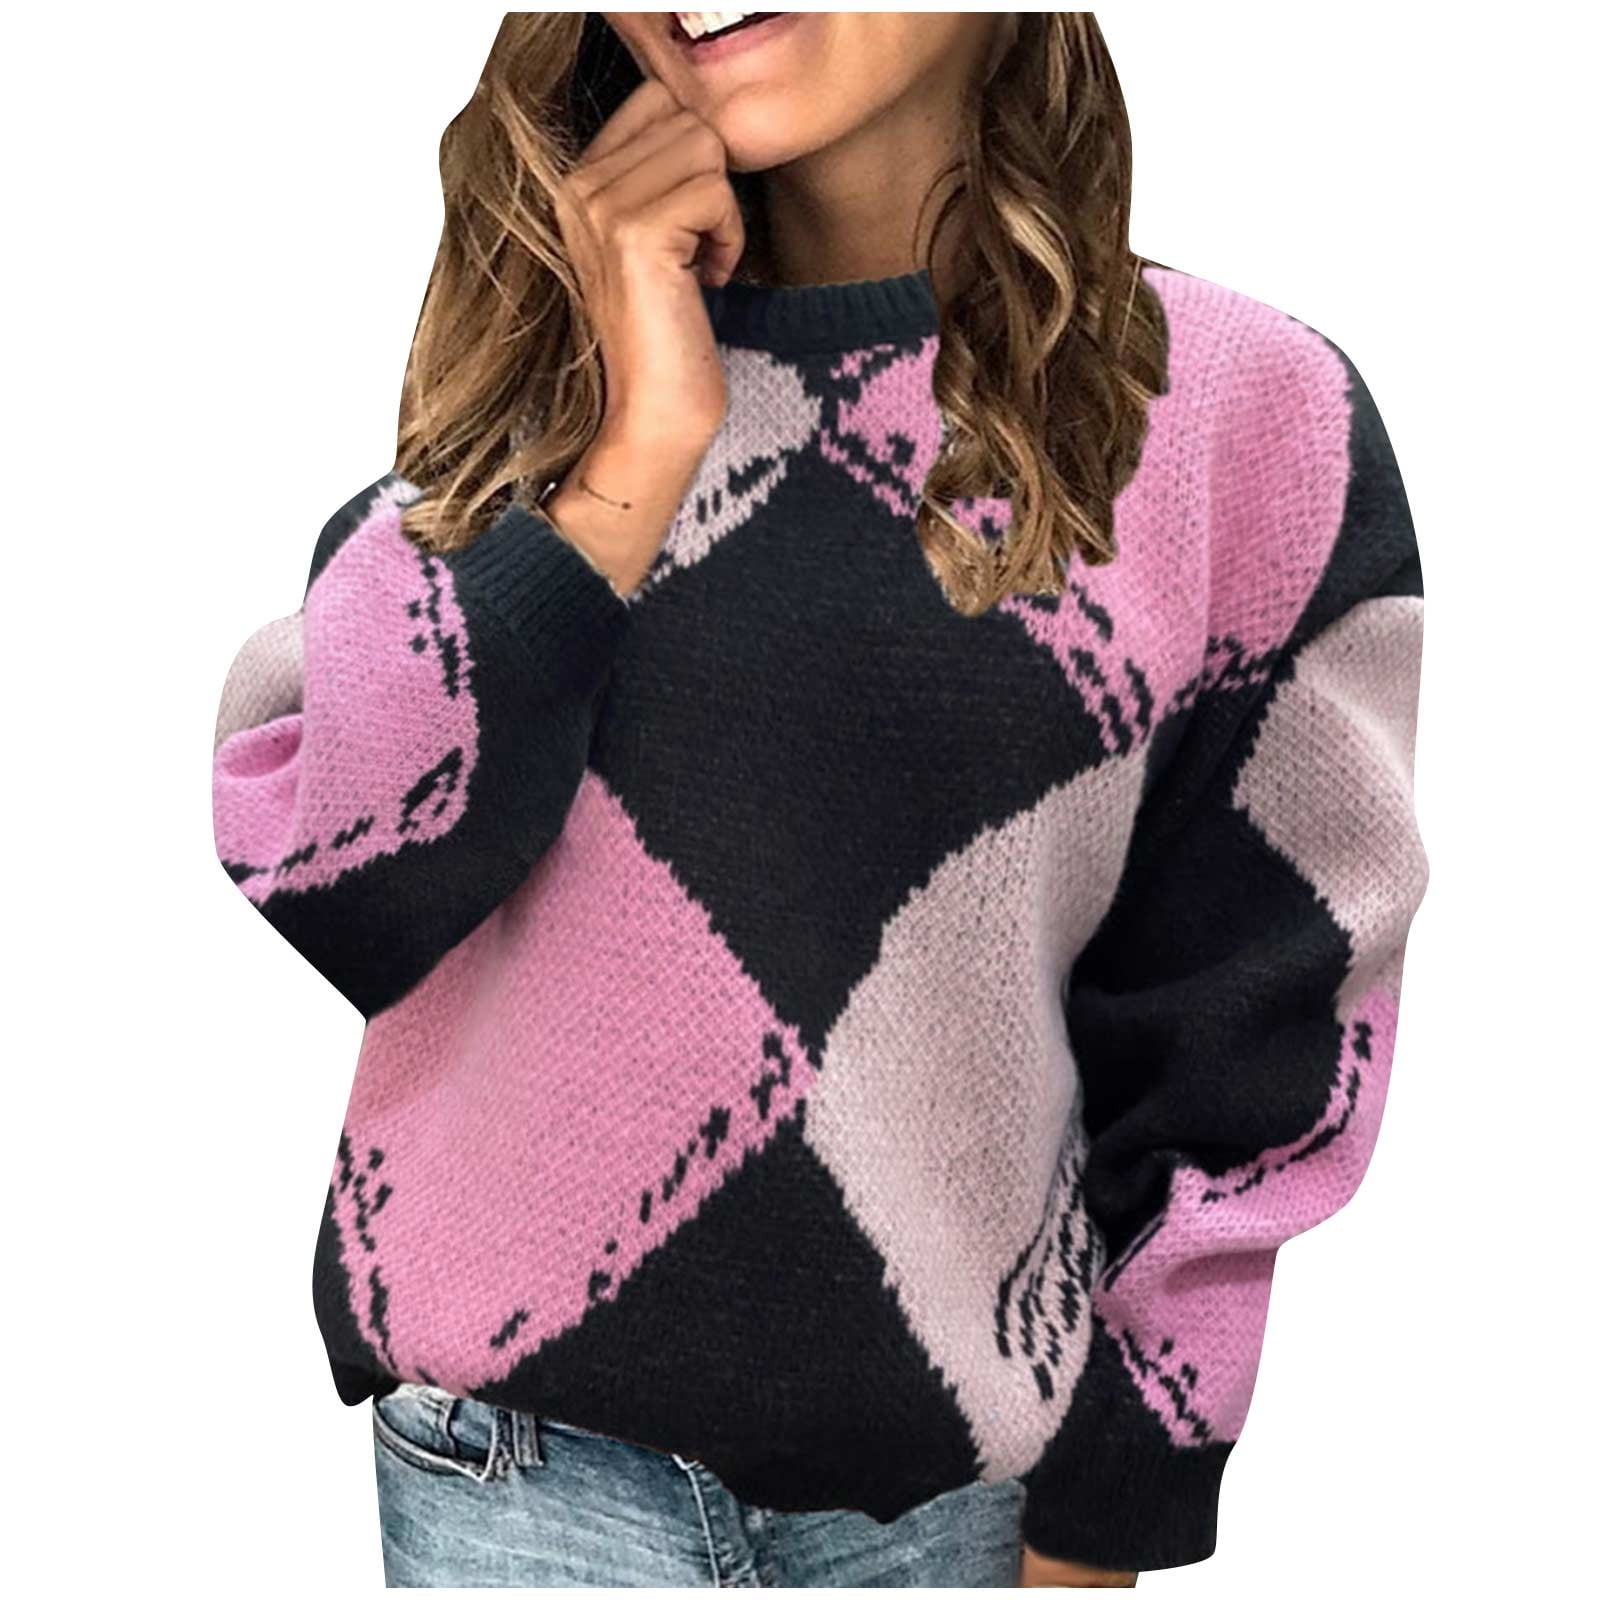 HAPIMO Rollbacks Cutout Tops for Women Fall Fashion Long Sleeve Round Neck  Blouse Casual Solid Chunky Knit Slim Fitting Sweater Teen Girls Clothes Hot  Pink S 